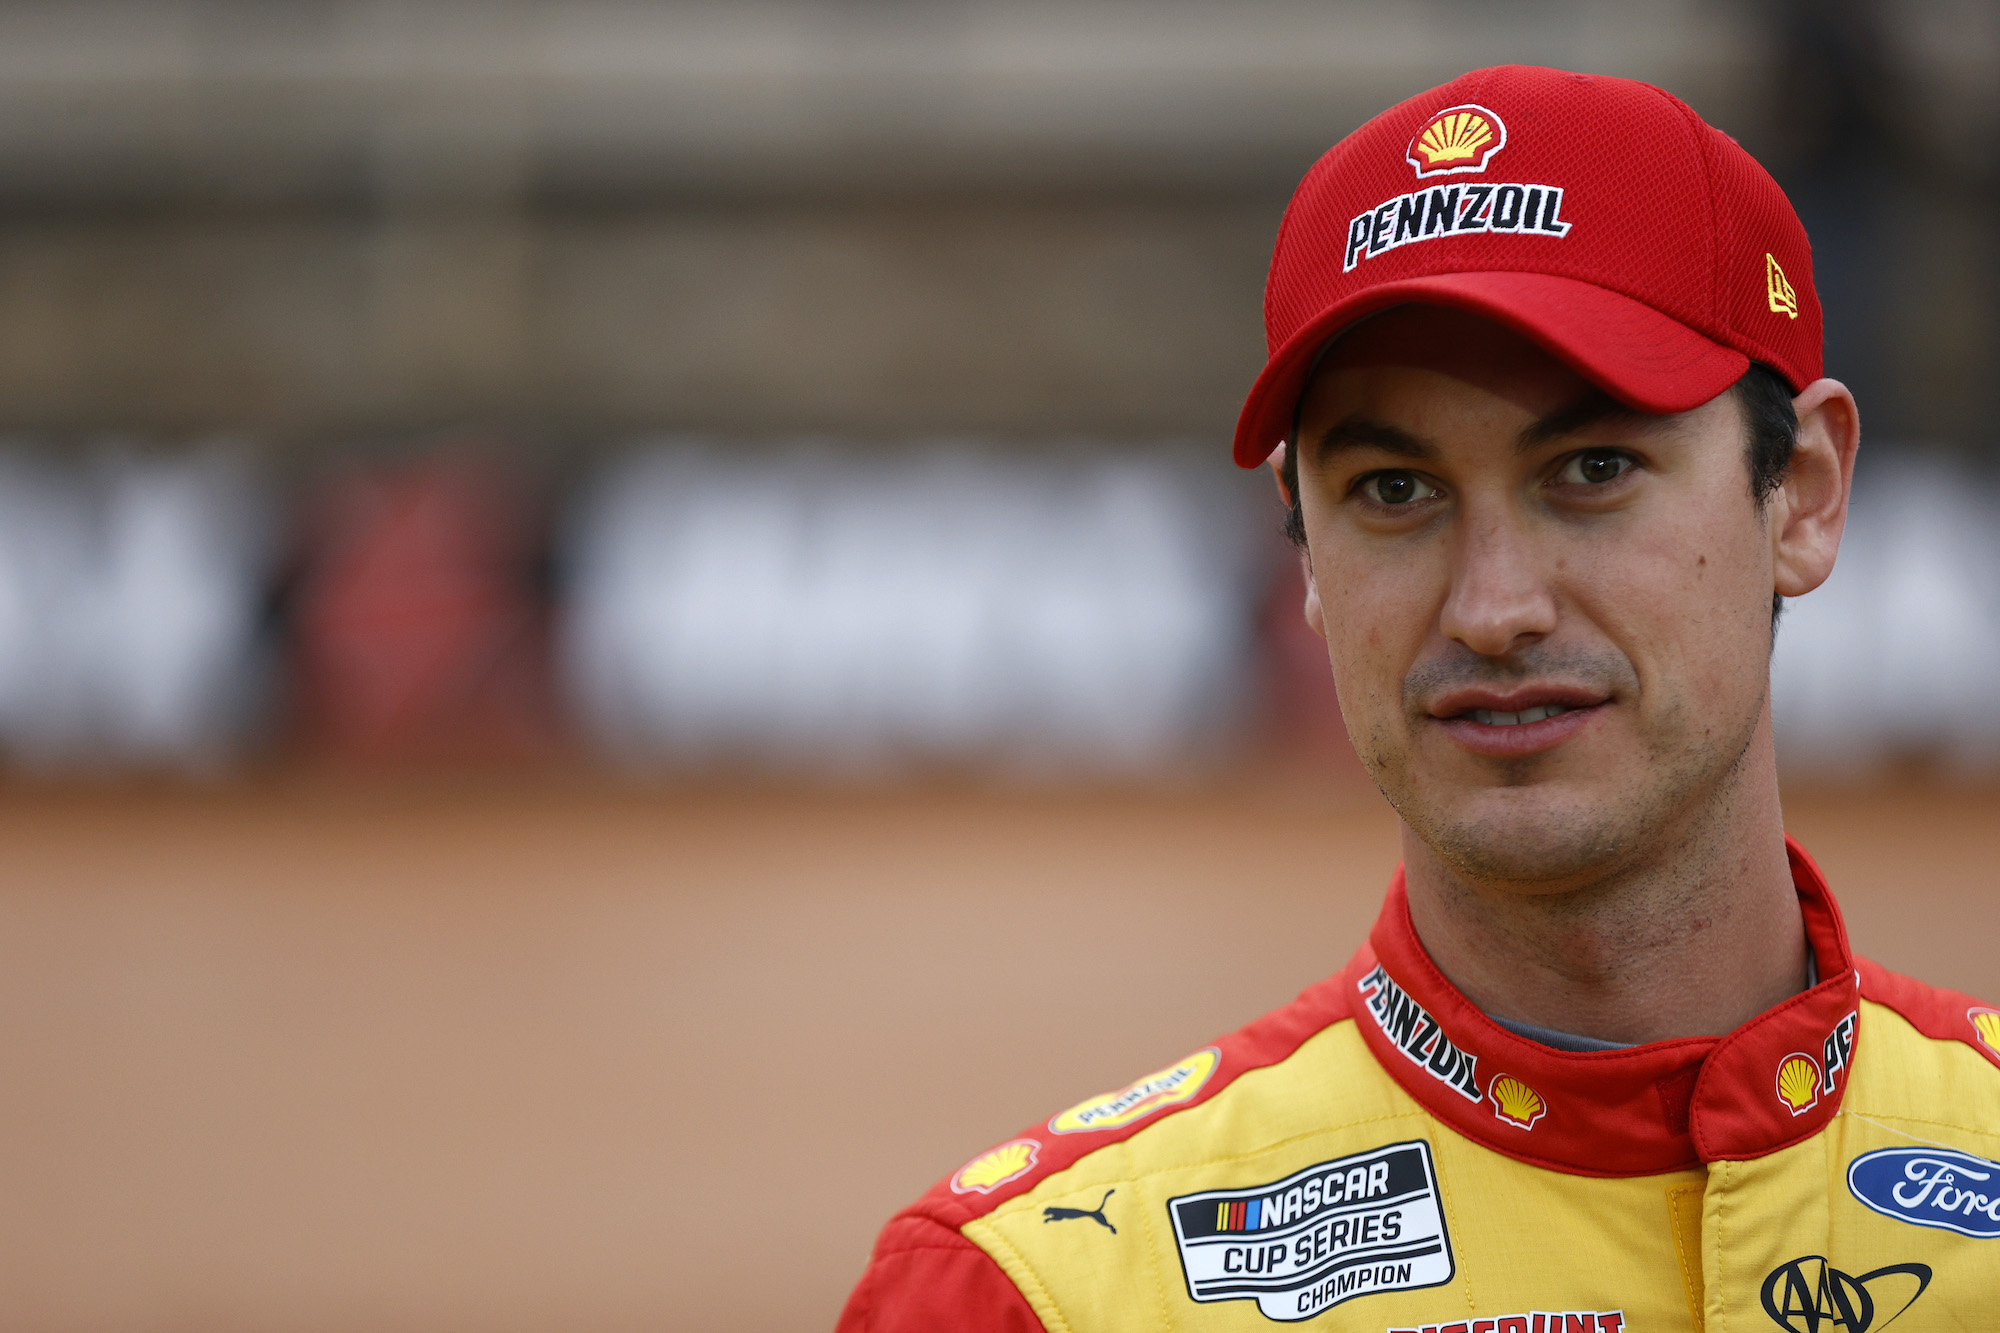 Joey Logano Calls Out Tyler Reddick for Smiling and Casual Reaction After Getting Wrecked on Final Lap at Bristol: ‘I Would Be Livid’